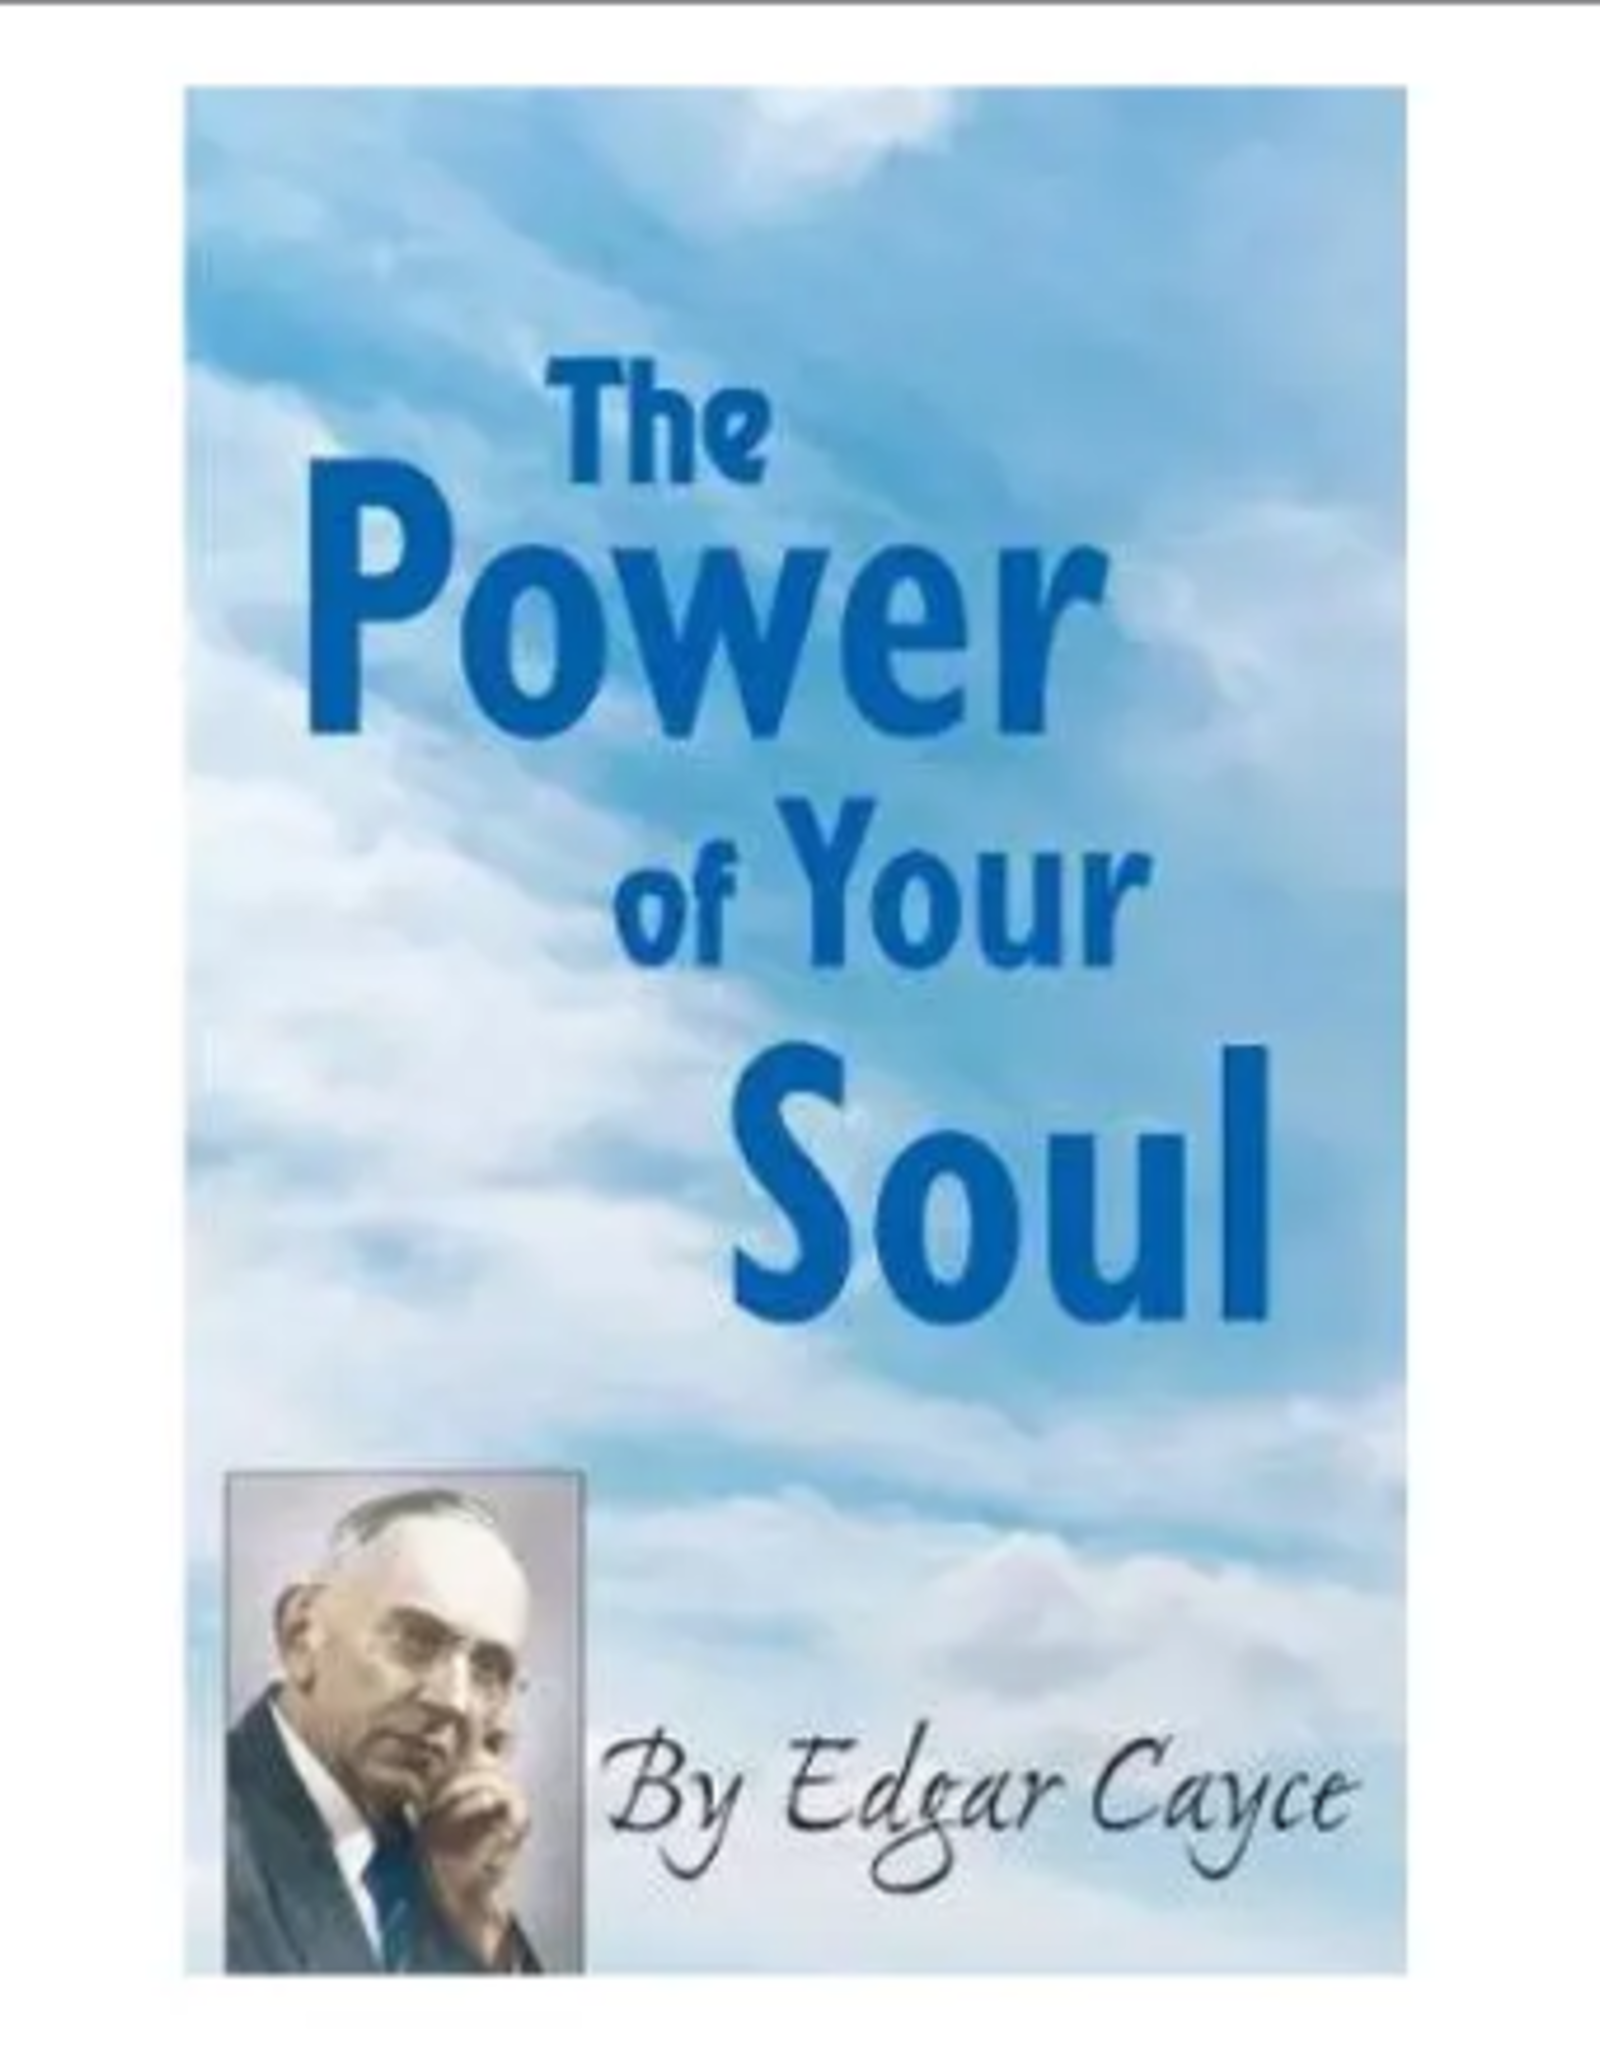 Edgar Cayce Power of Your Soul by Edgar Cayce